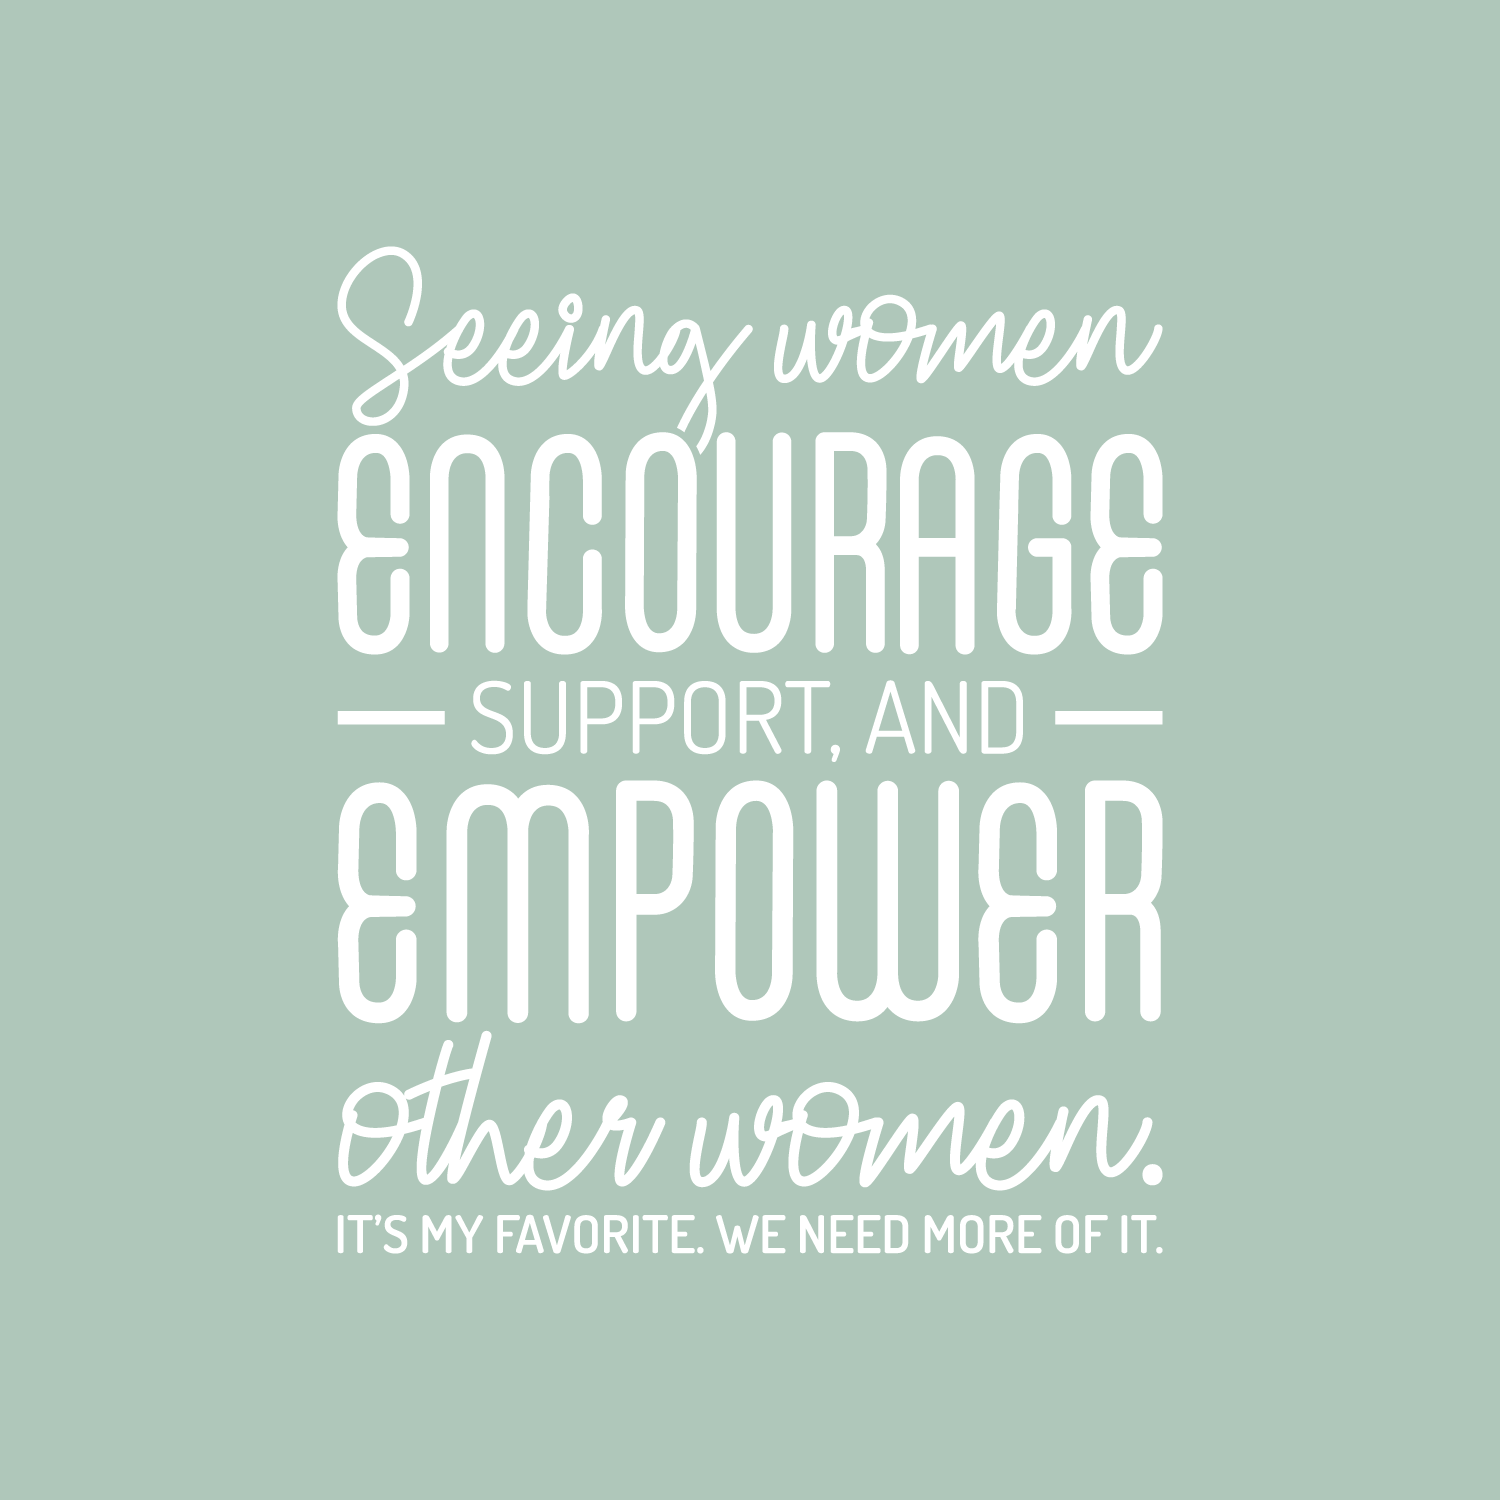 Printique Vinyl Wall Art Decal - Seeing Women Encourage Support And ...